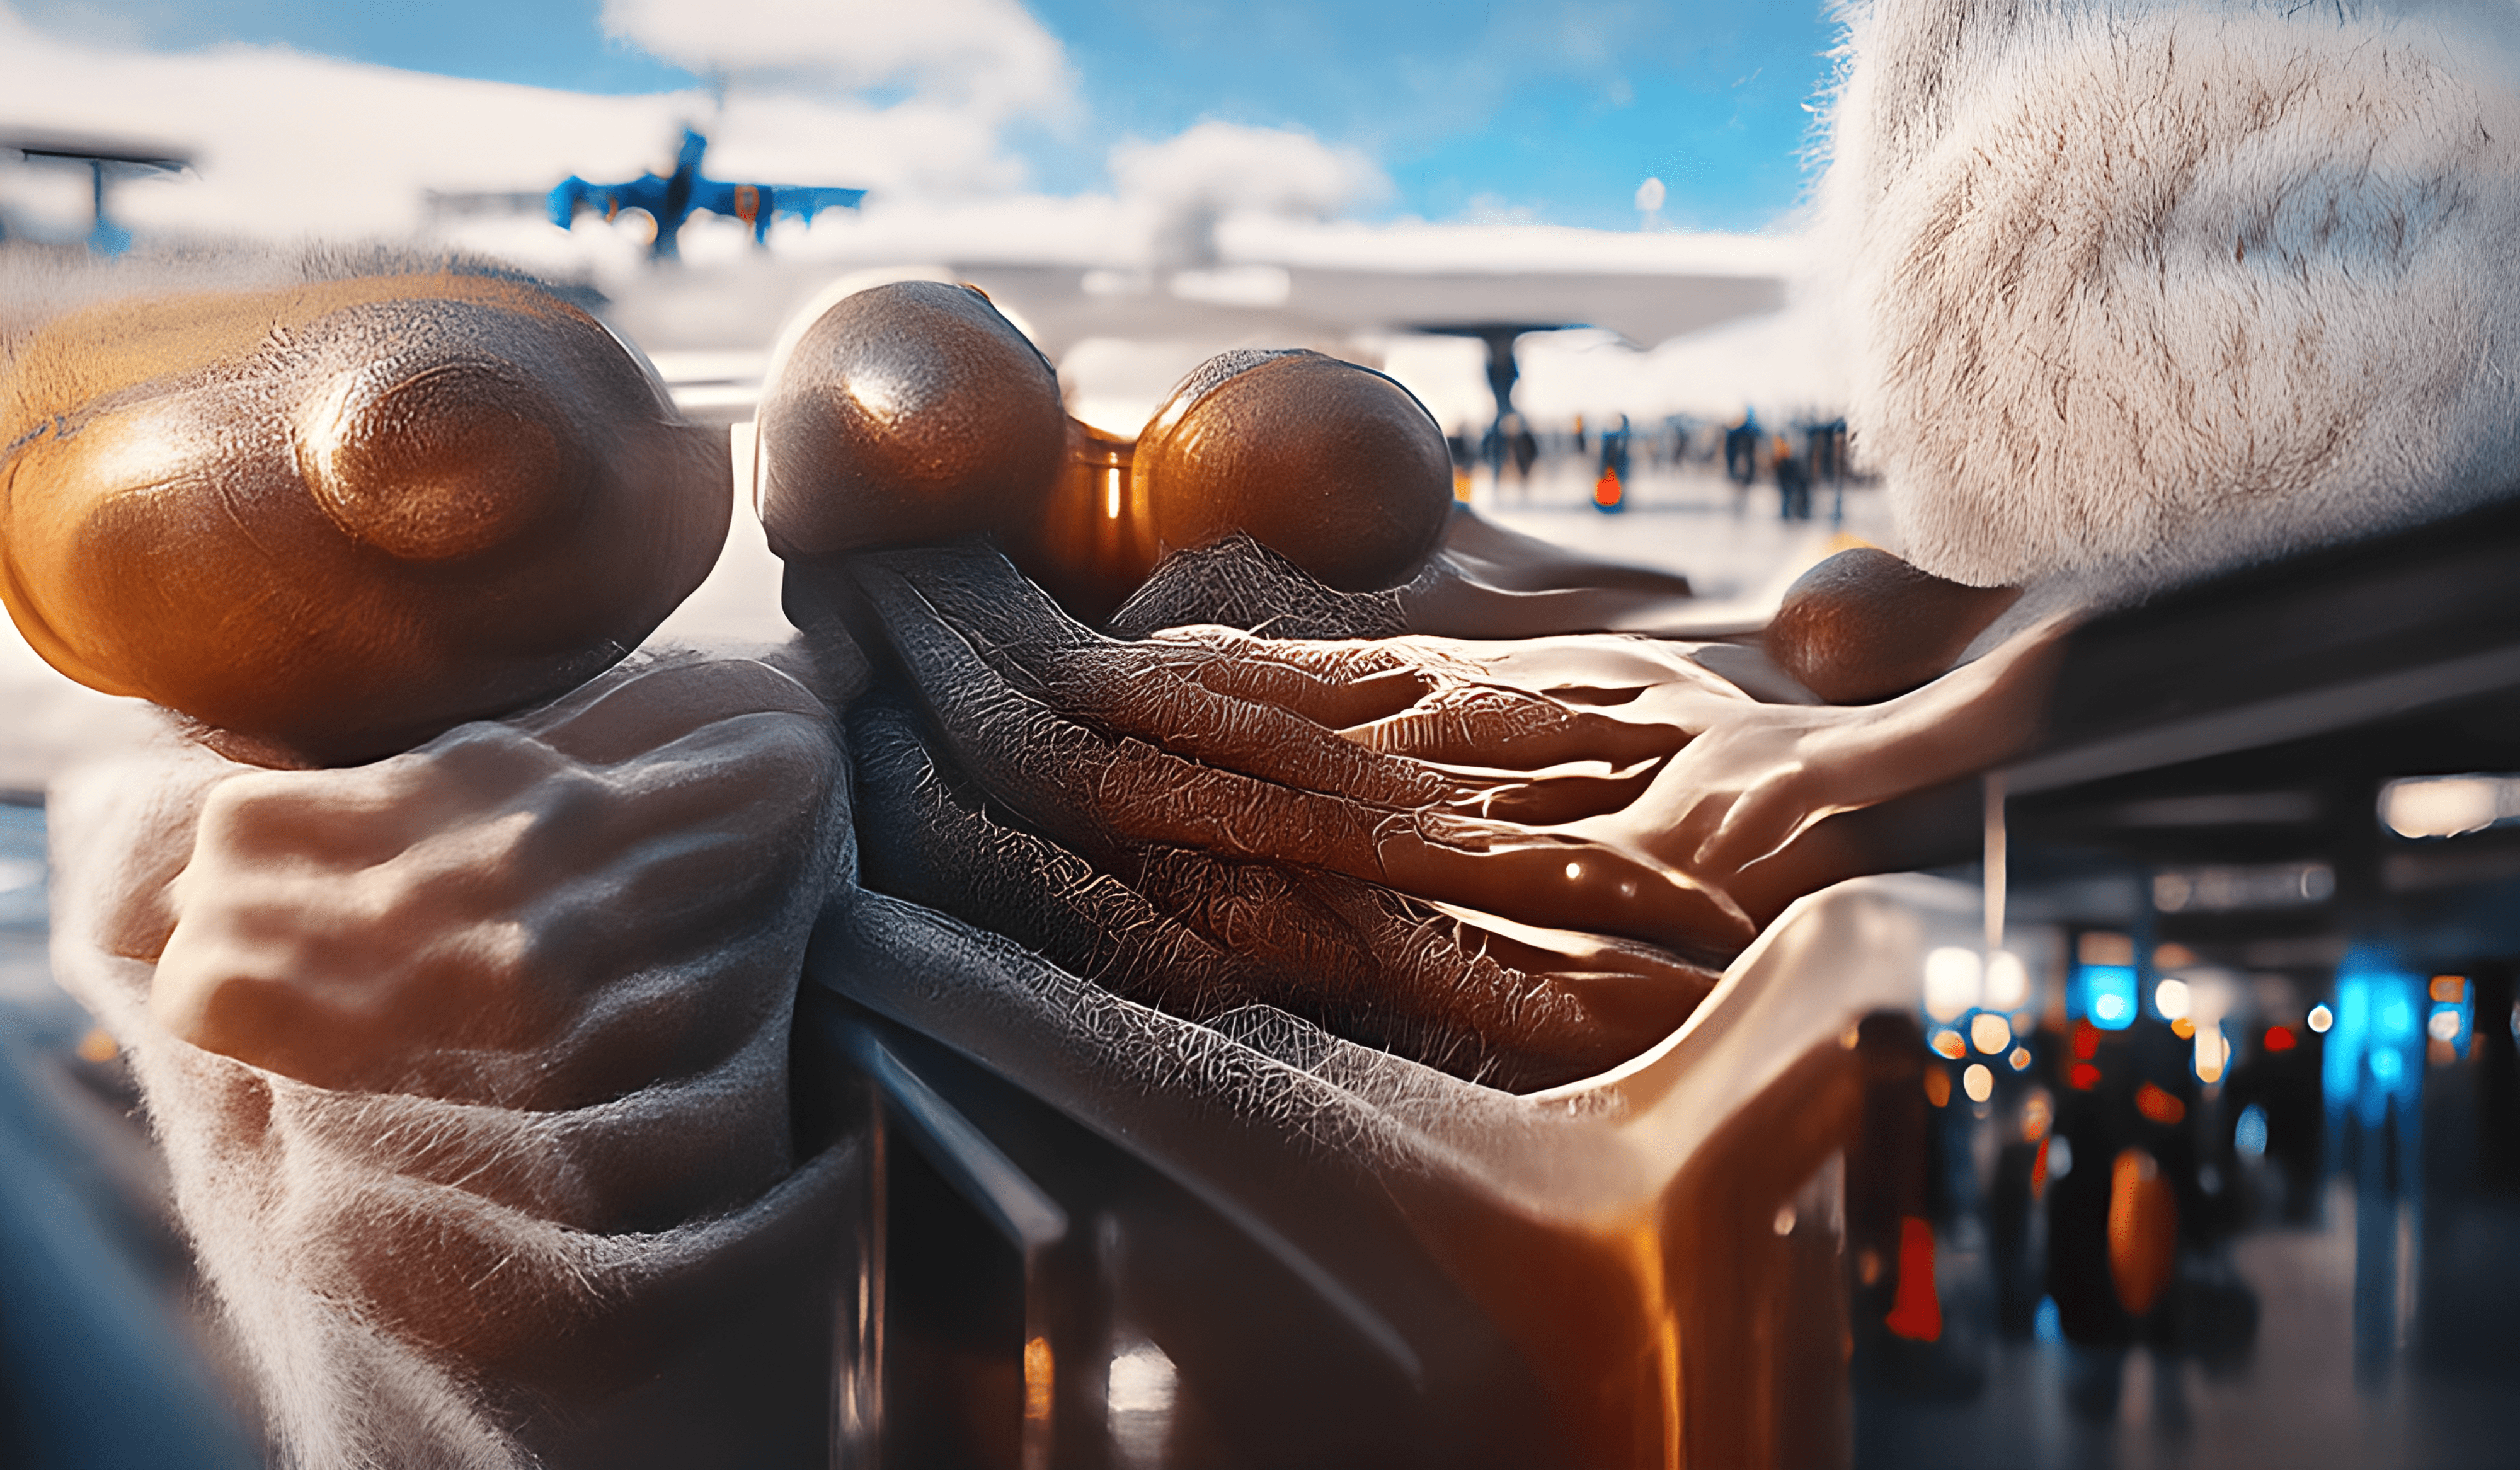 CWO#0167: Airport Embrace